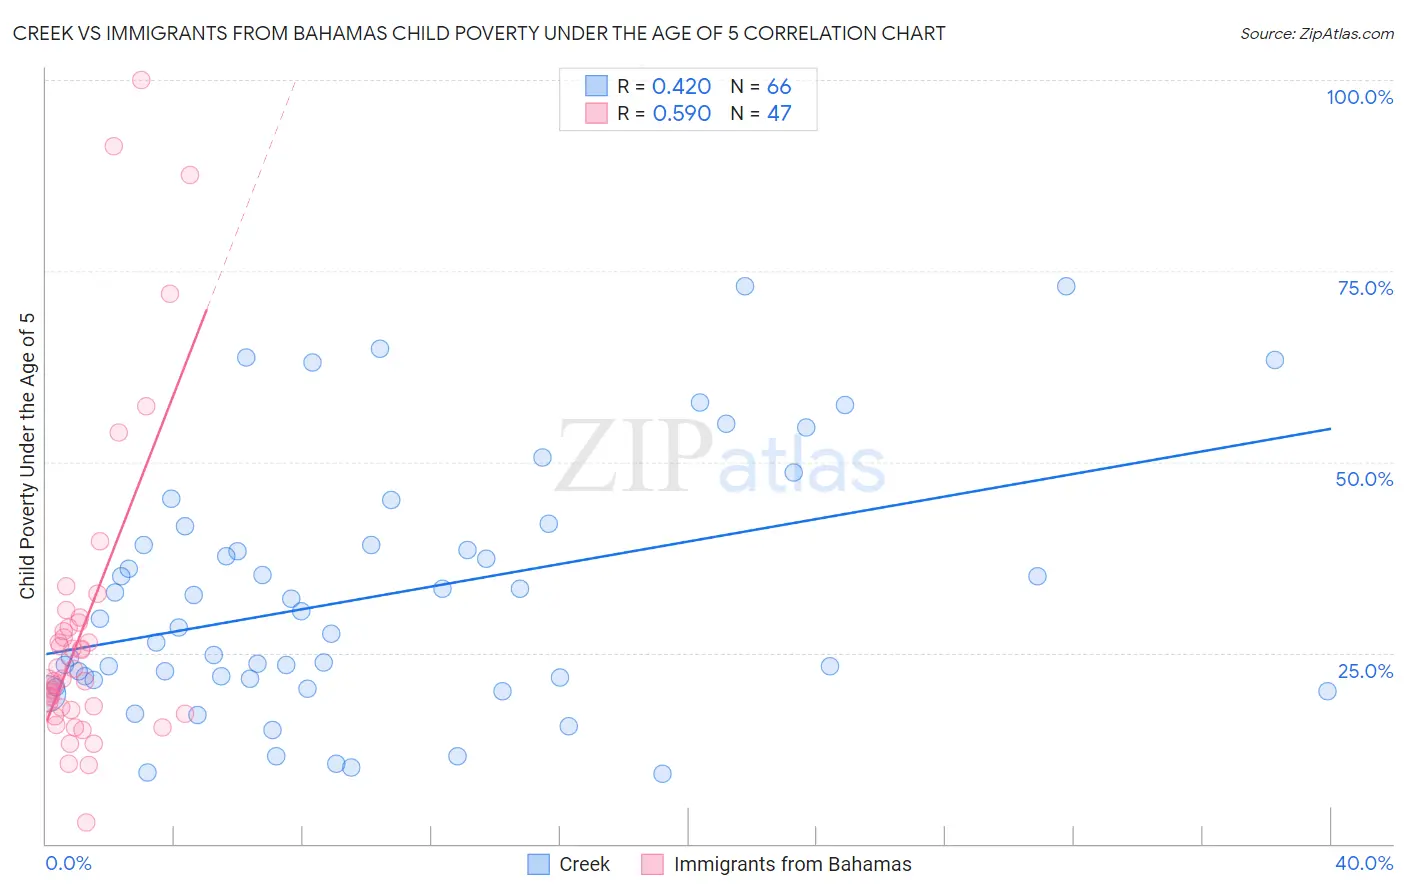 Creek vs Immigrants from Bahamas Child Poverty Under the Age of 5